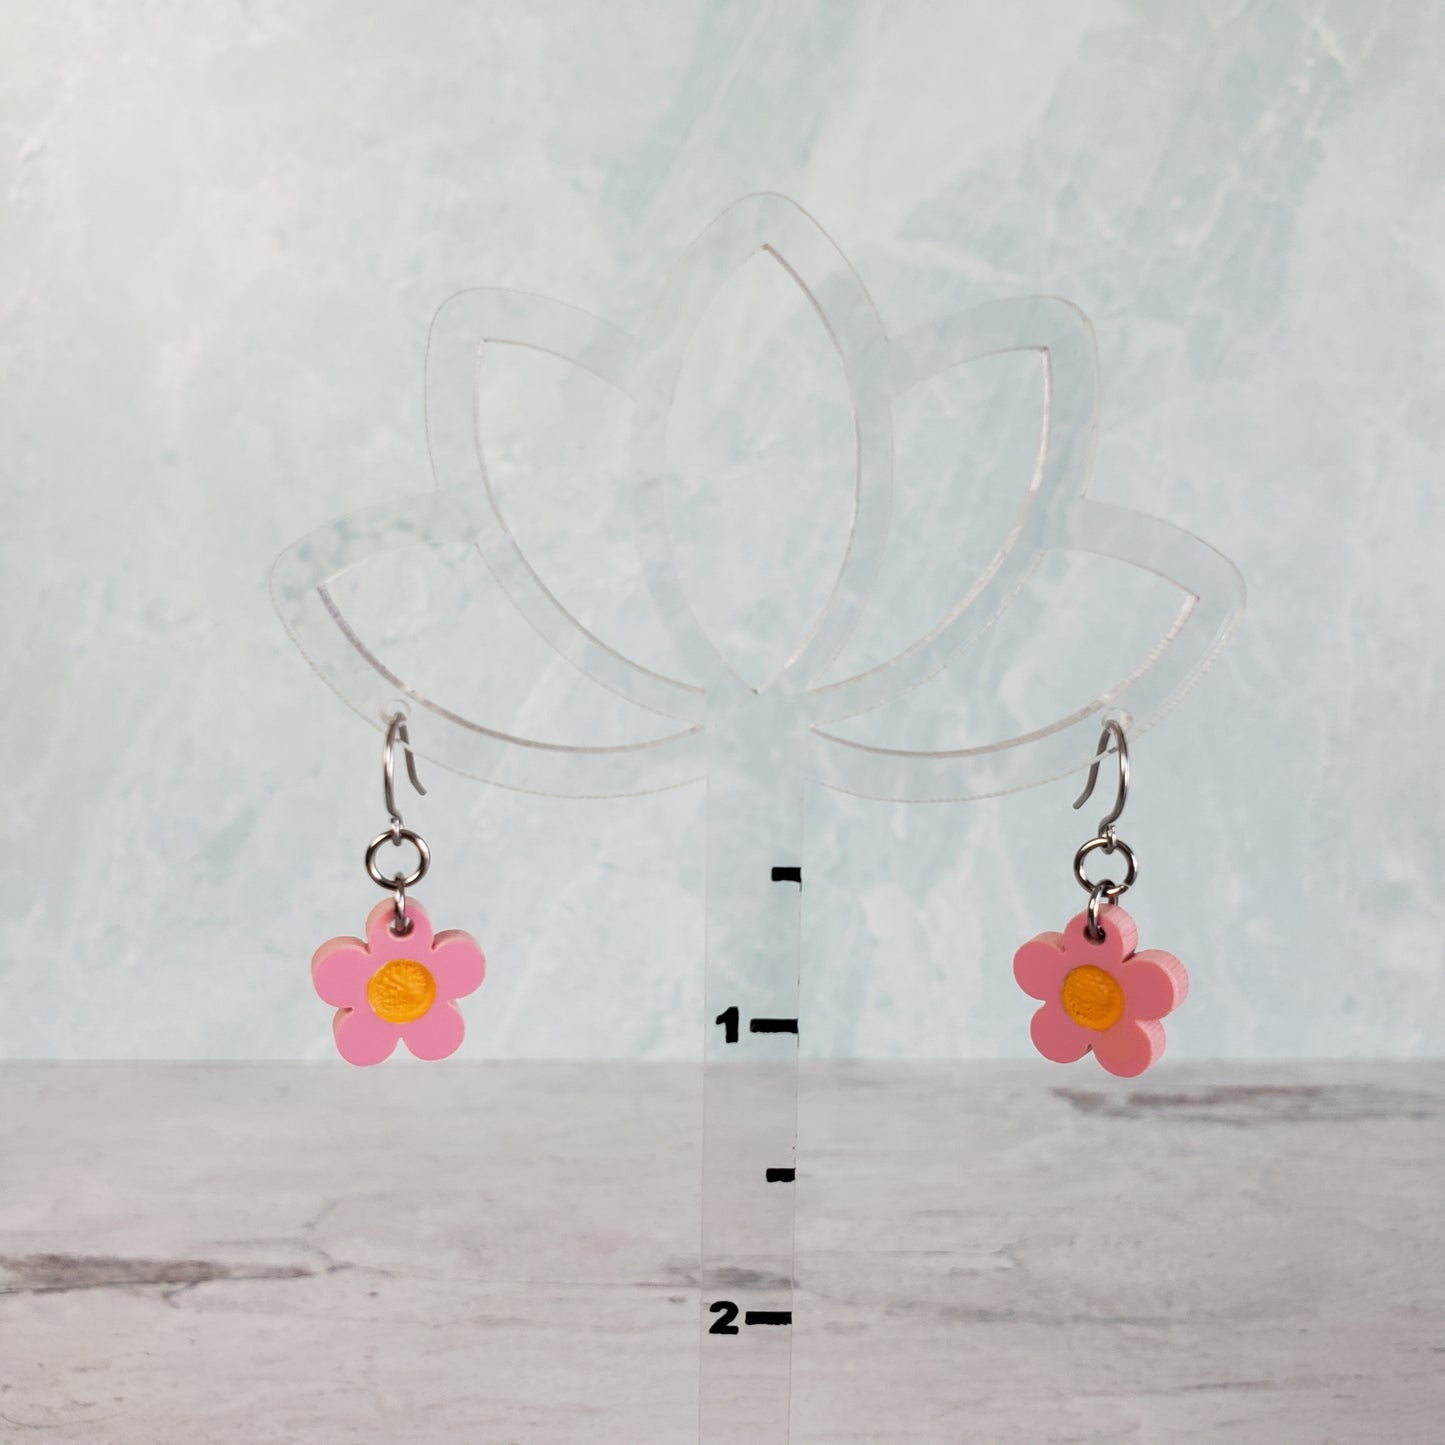 Pink daisy earrings on hanging display